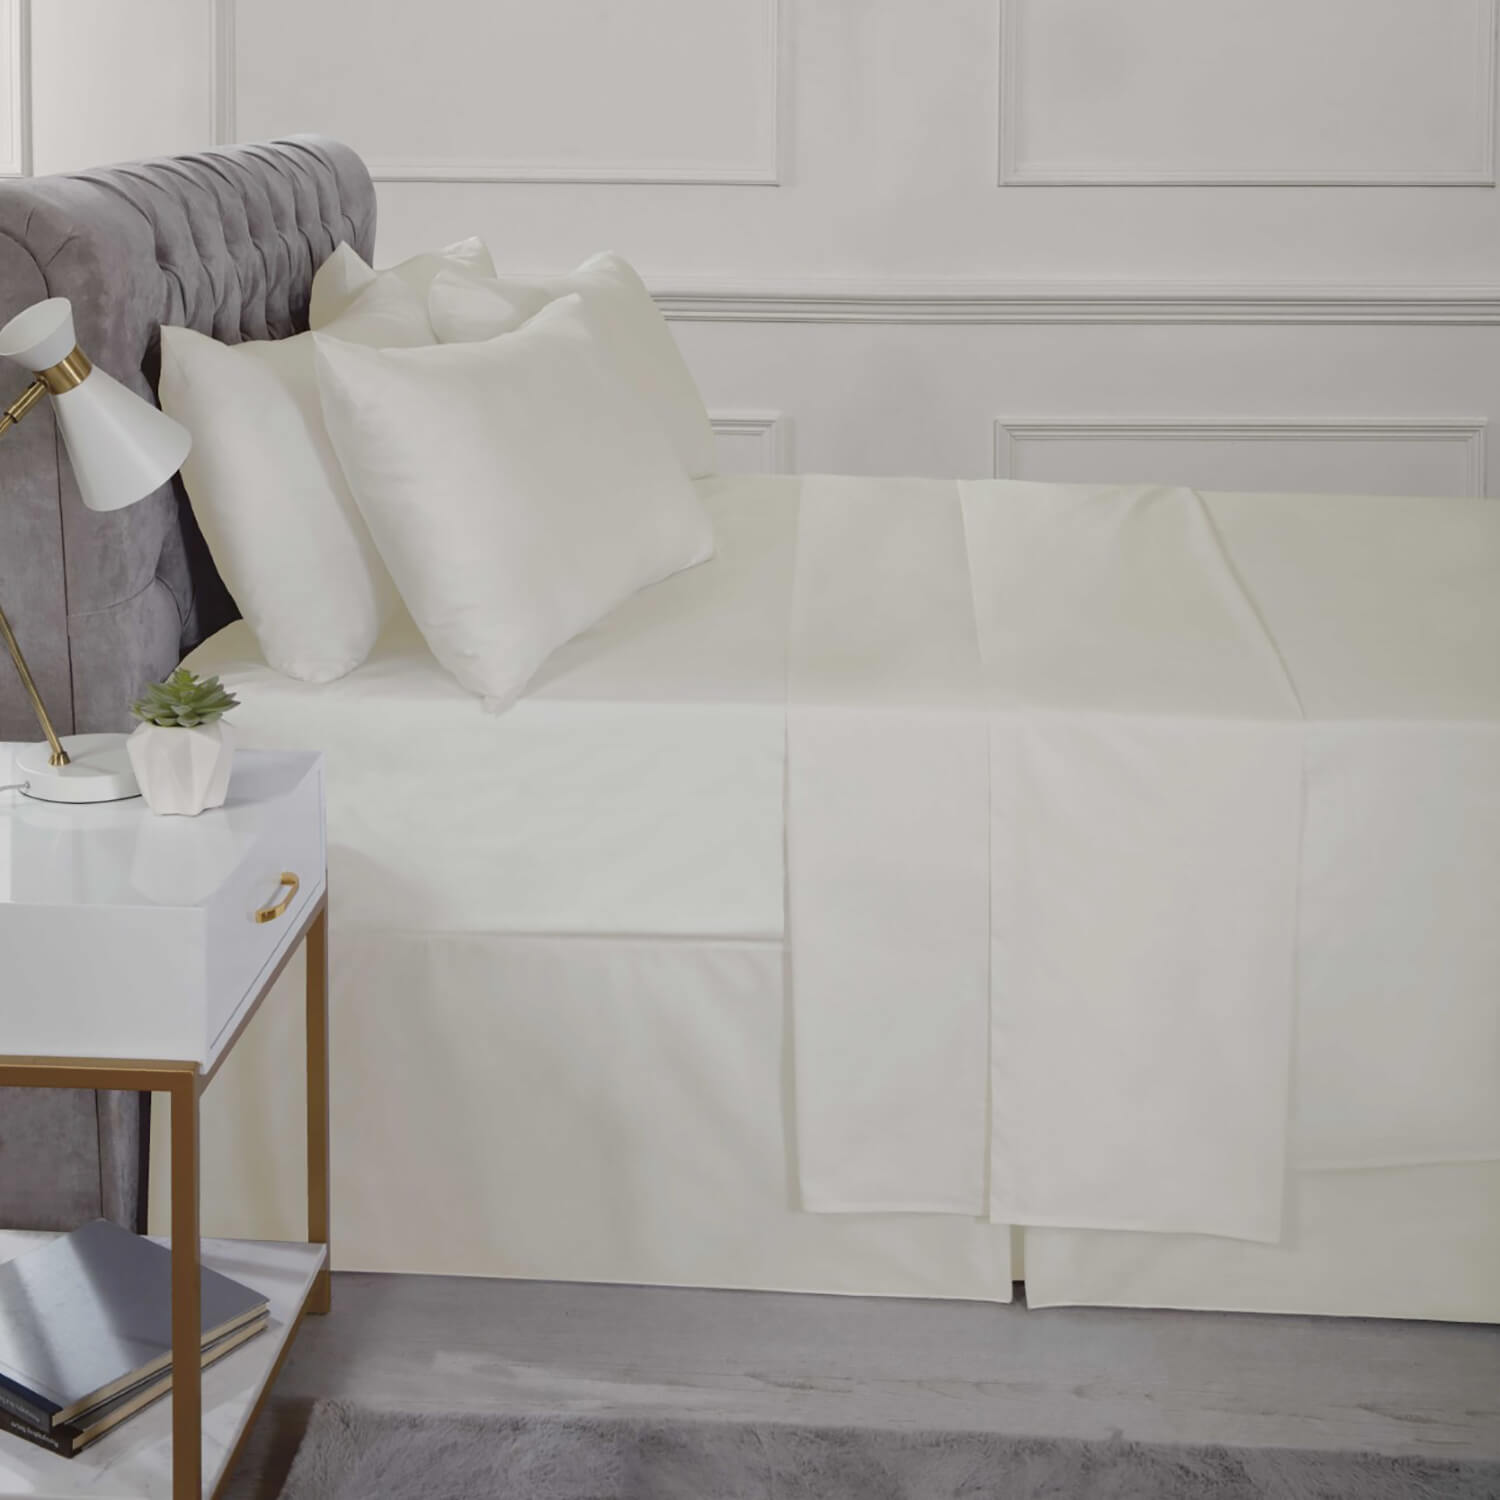 The Home Bedroom Easy Care Percale Flat Sheet - Cream 1 Shaws Department Stores